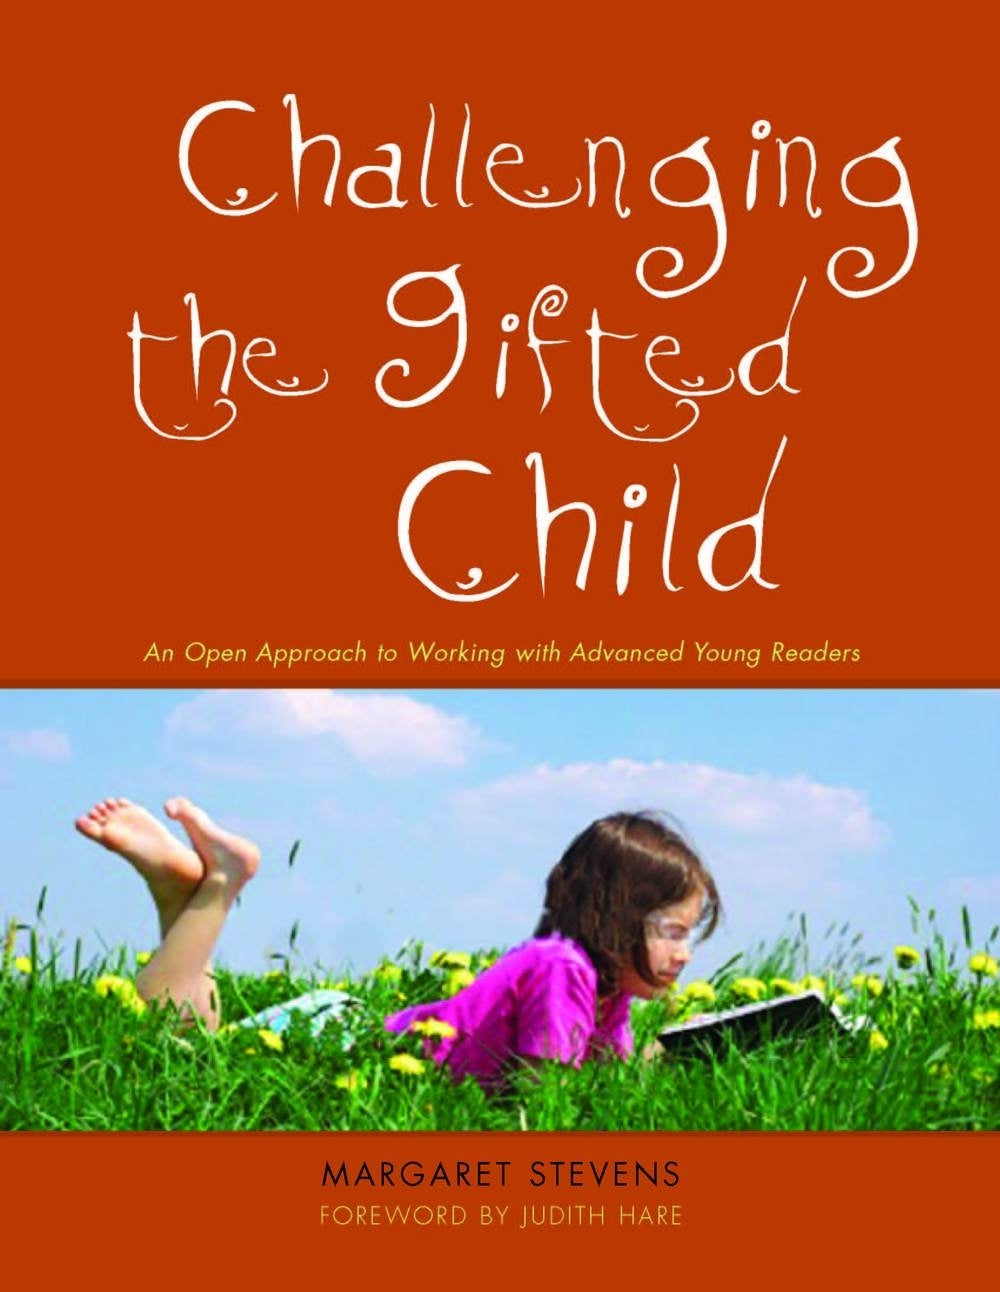 Challenging the Gifted Child by Margaret Stevens